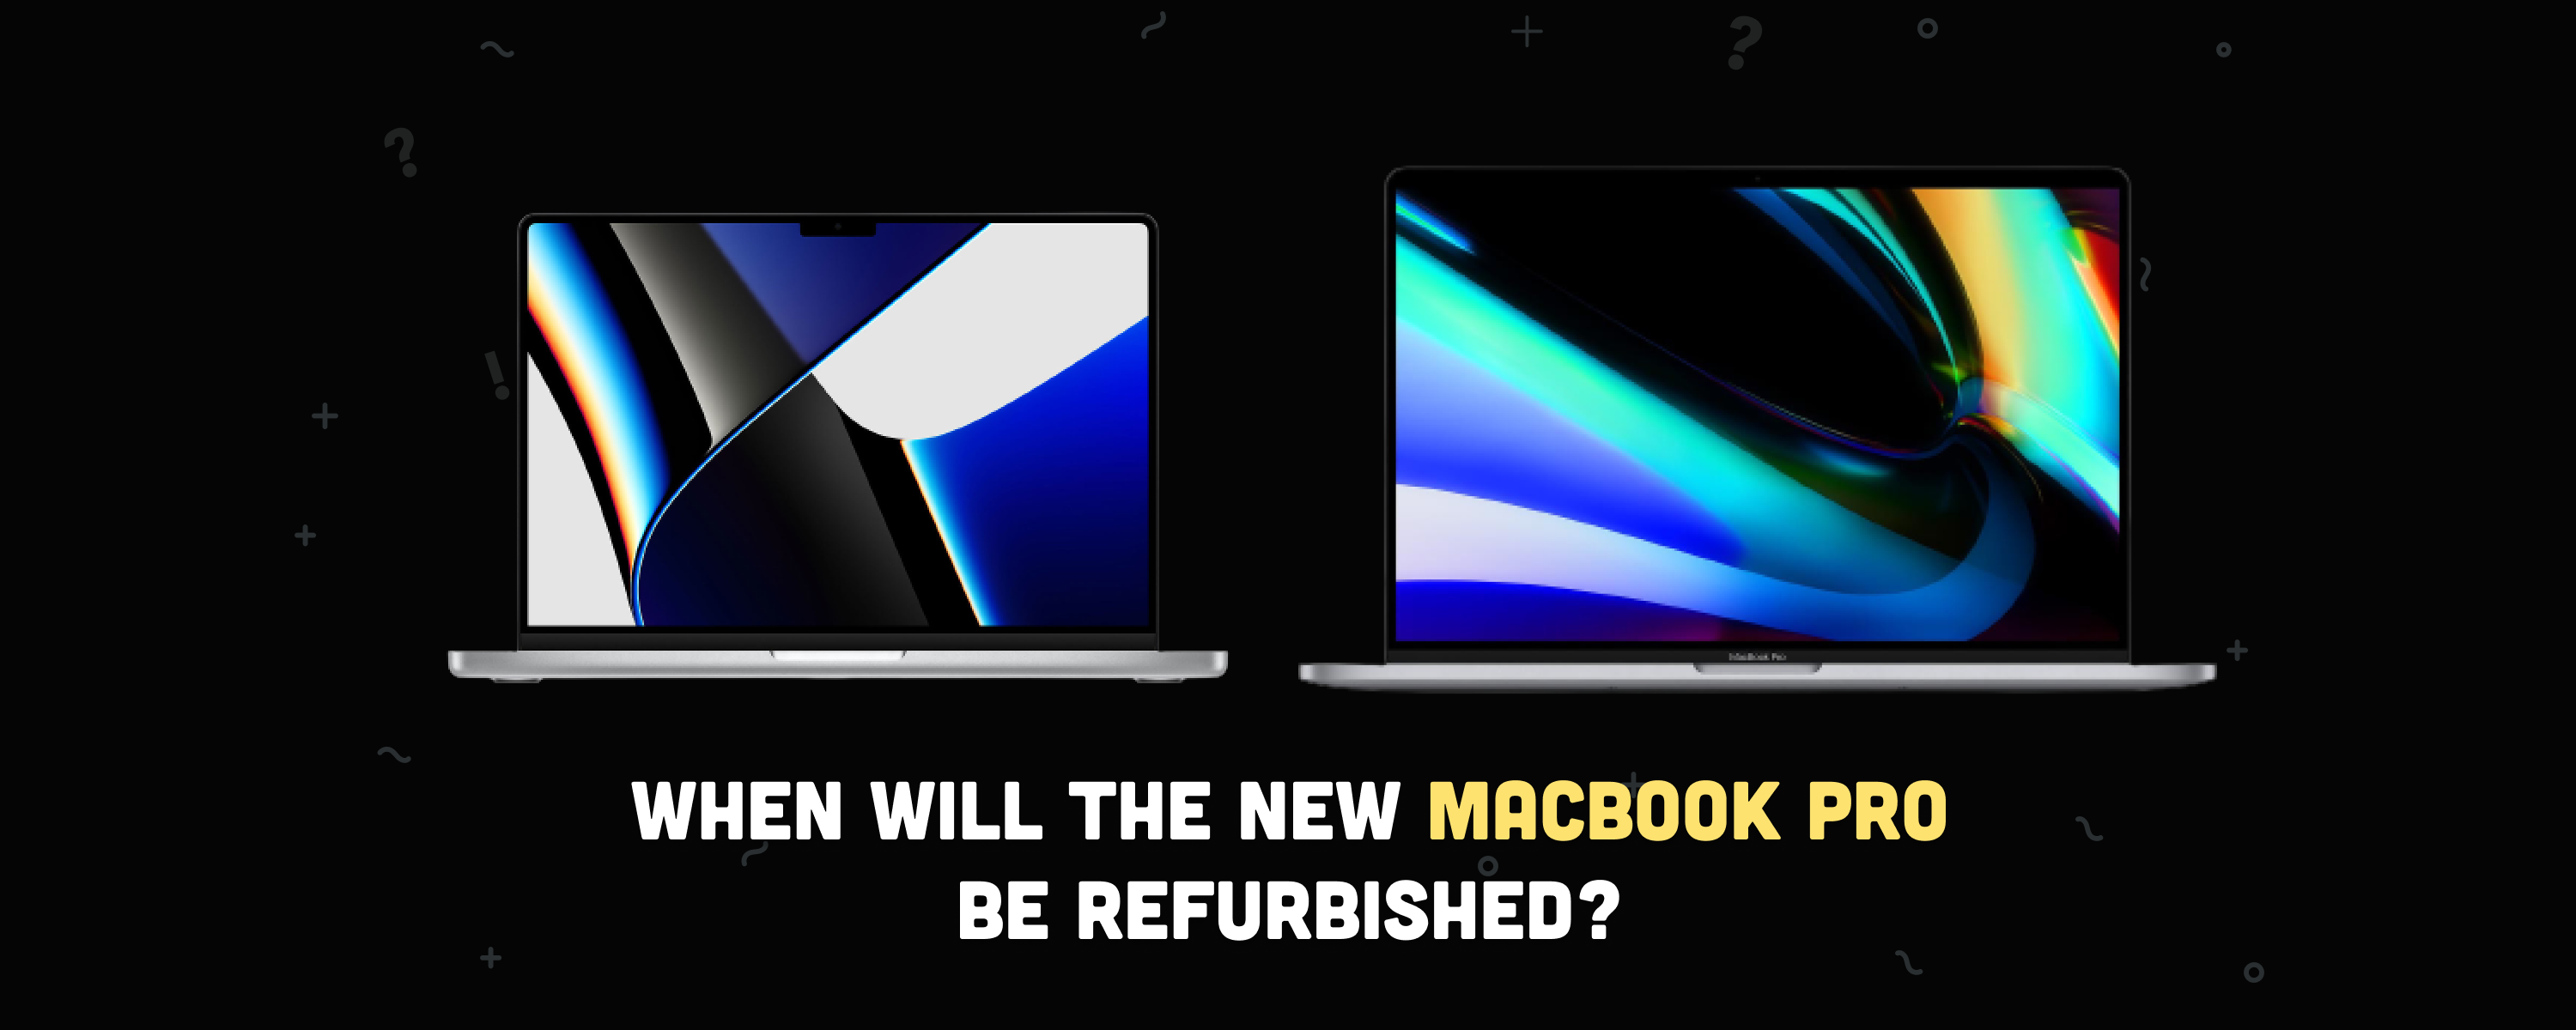 Apple Now Refurbishes the M1 Pro and M1 Max MacBook Pro